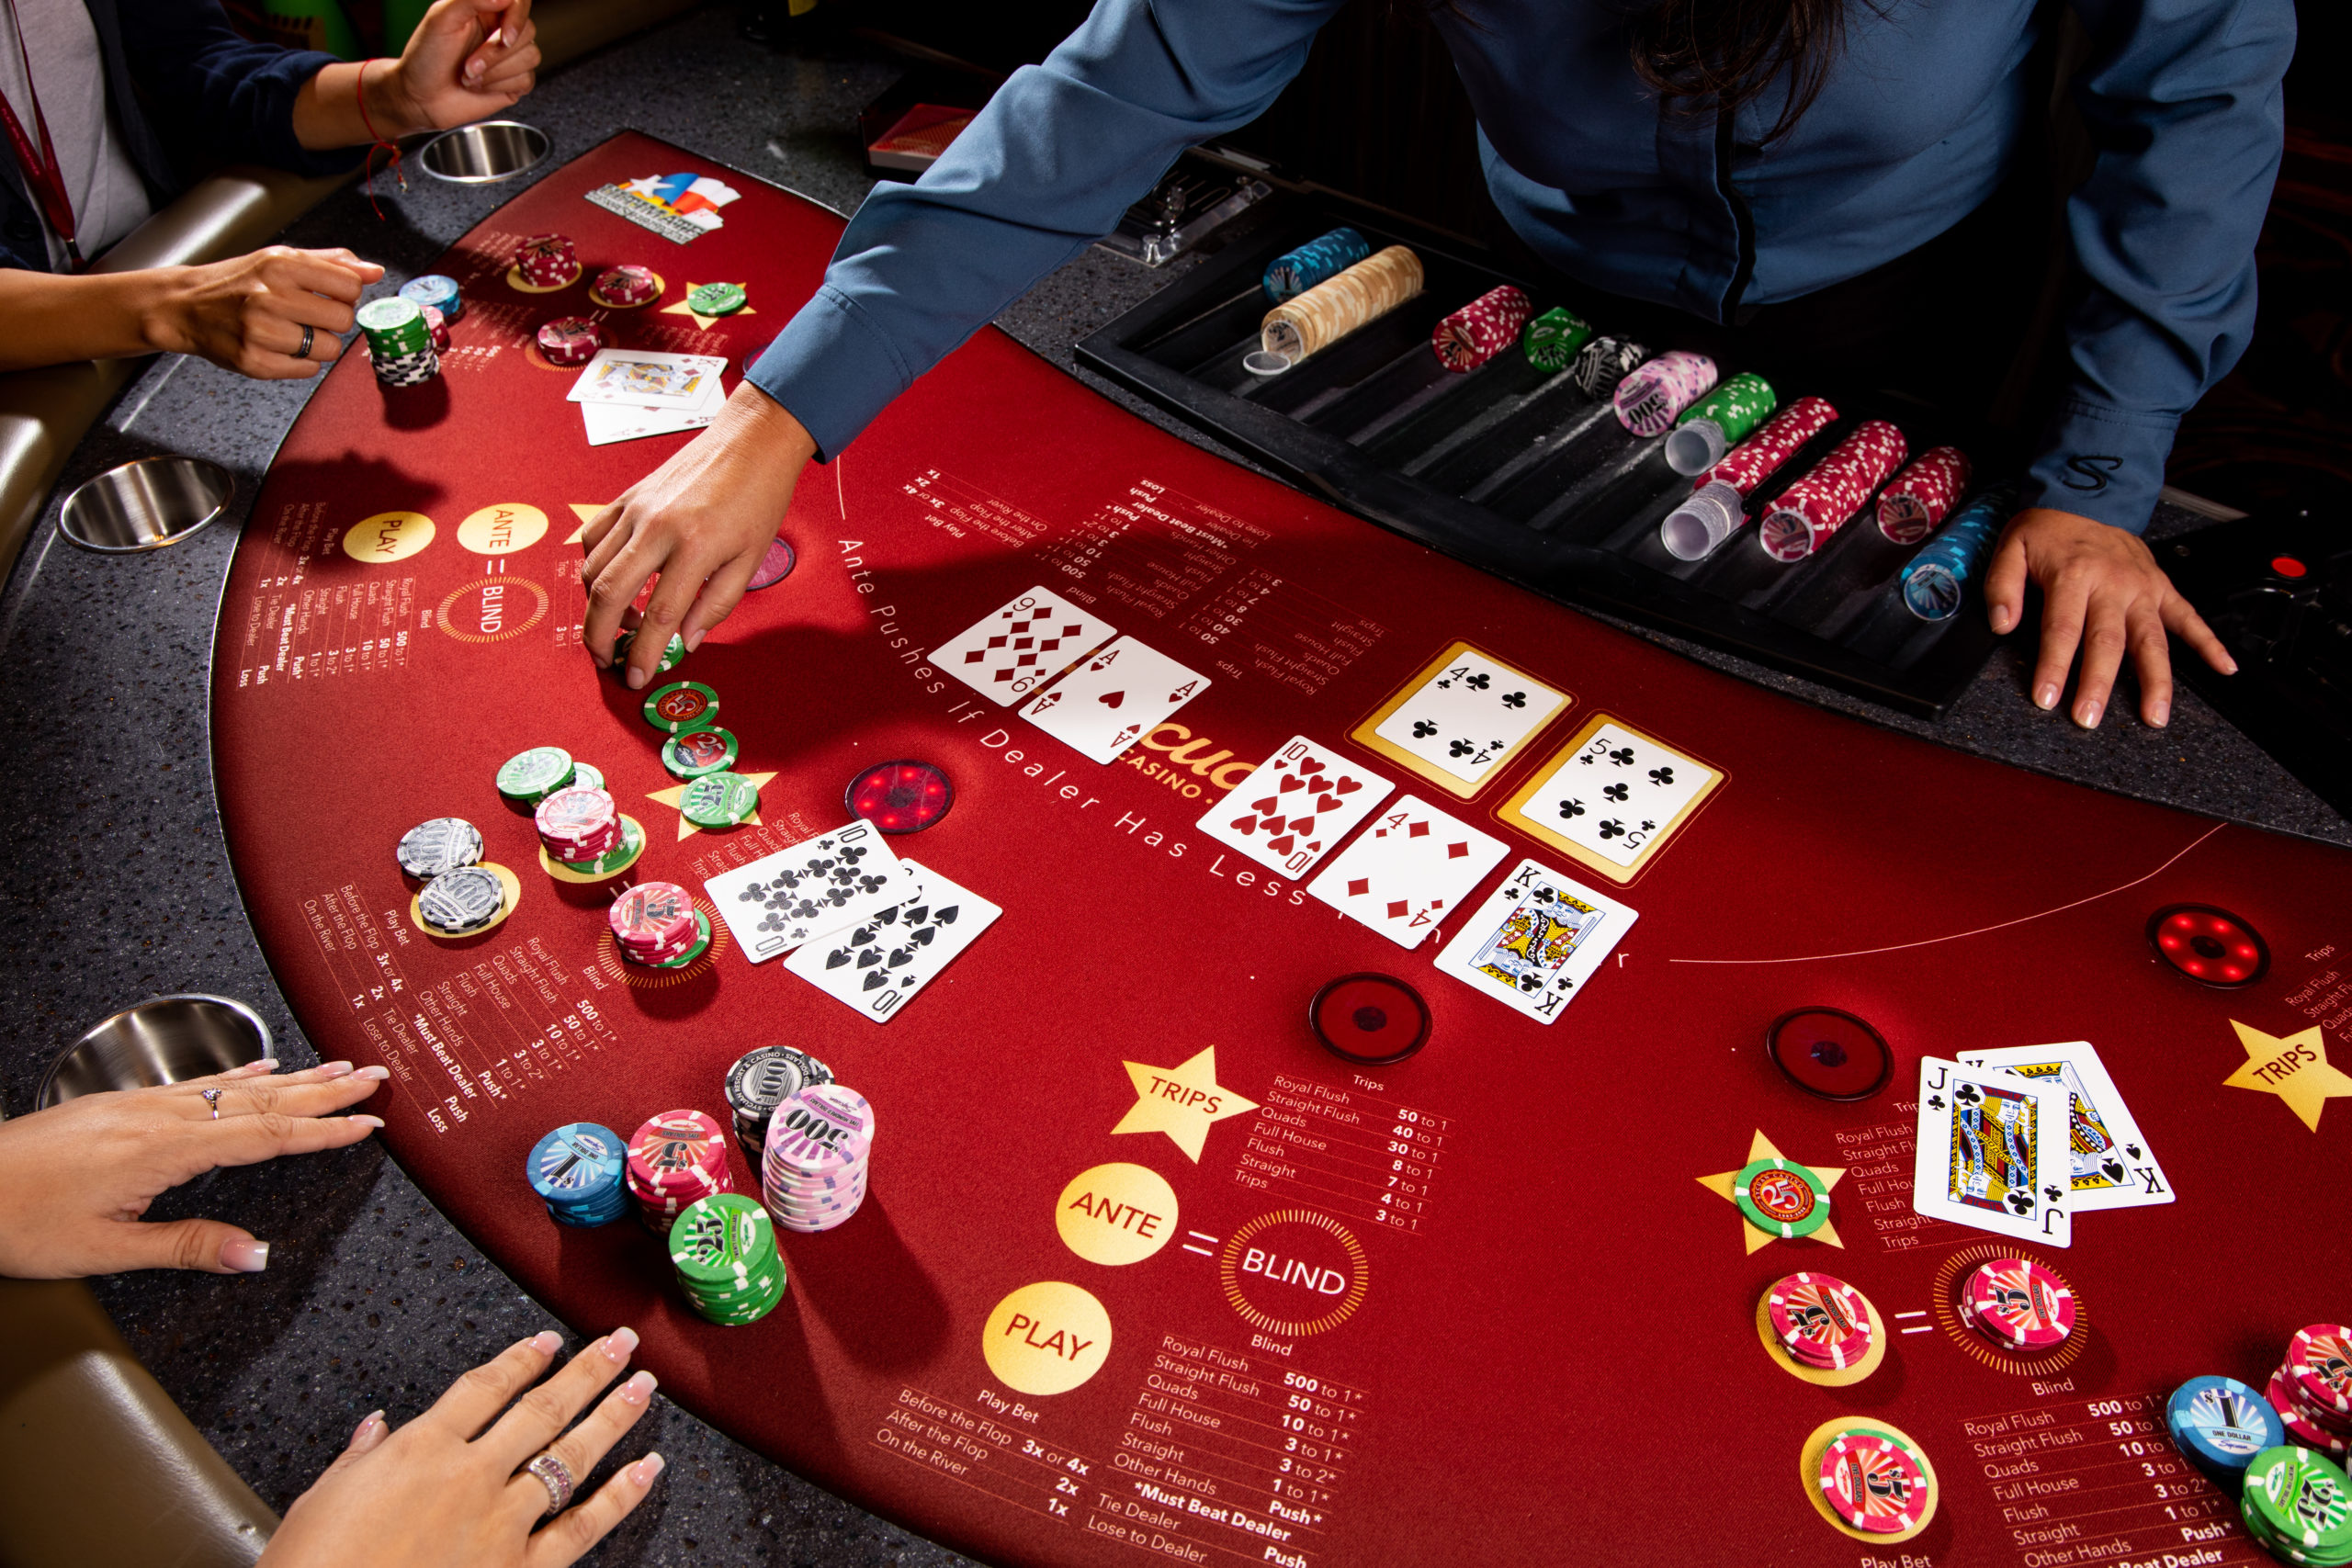 poker tournaments in india